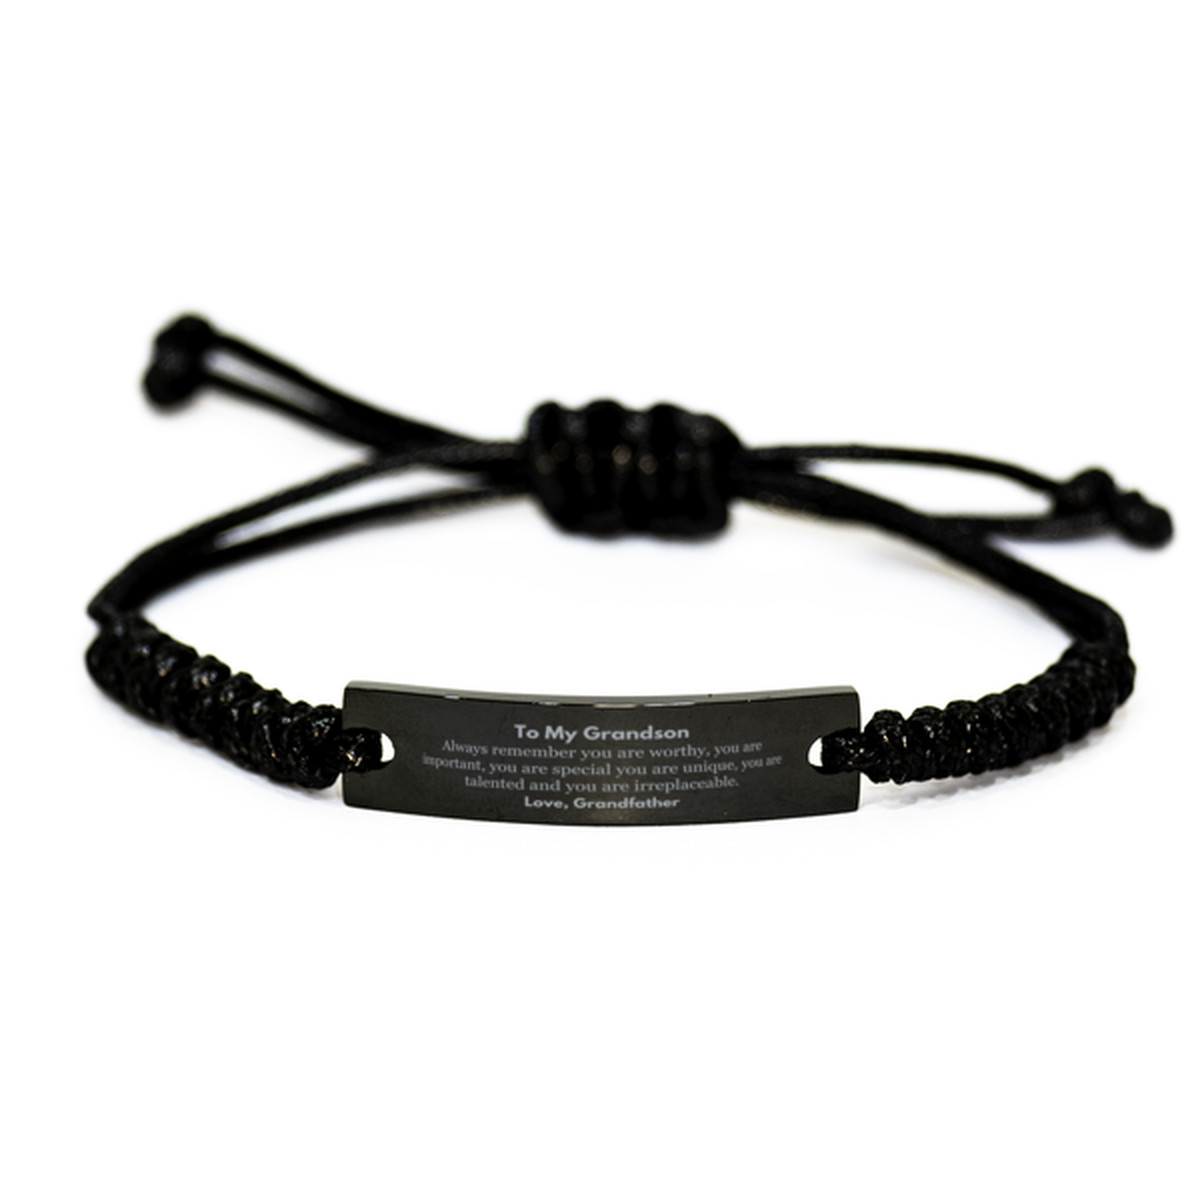 Grandson Birthday Gifts from Grandfather, Inspirational Black Rope Bracelet for Grandson Christmas Graduation Gifts for Grandson Always remember you are worthy, you are important. Love, Grandfather